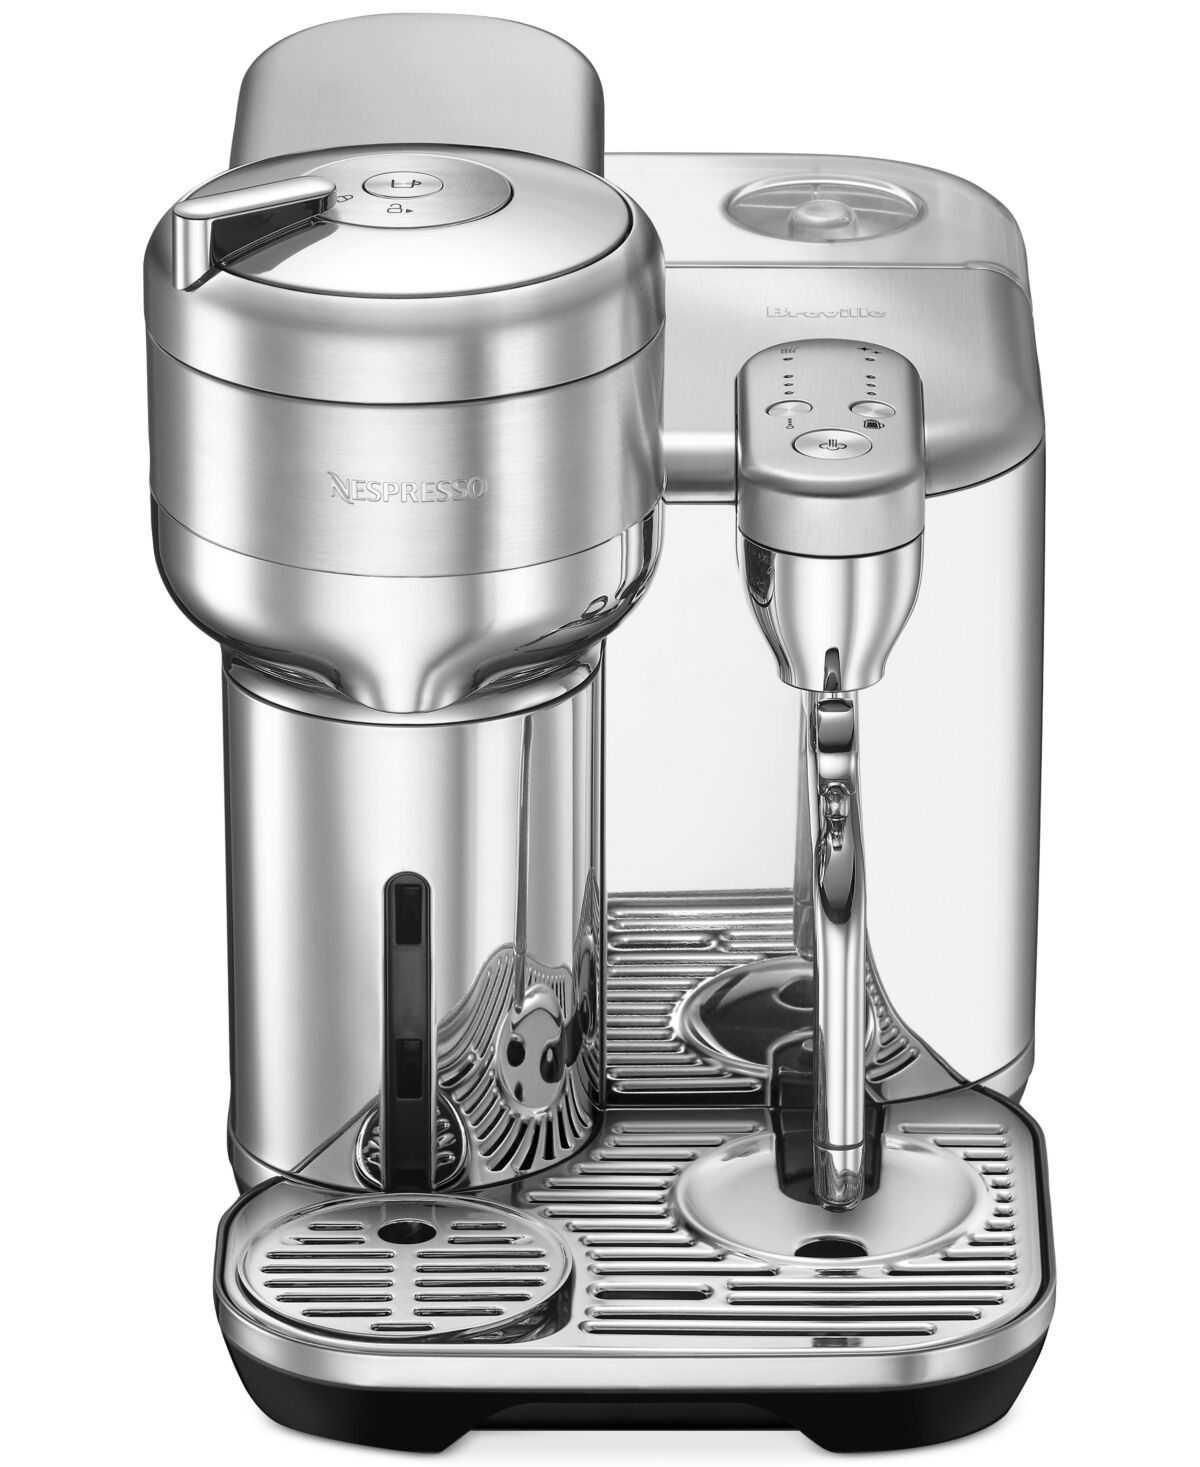 Breville Nespresso Vertuo Creatista by Breville Coffee and Espresso Machine in Stainless Steel - Stainless Steel